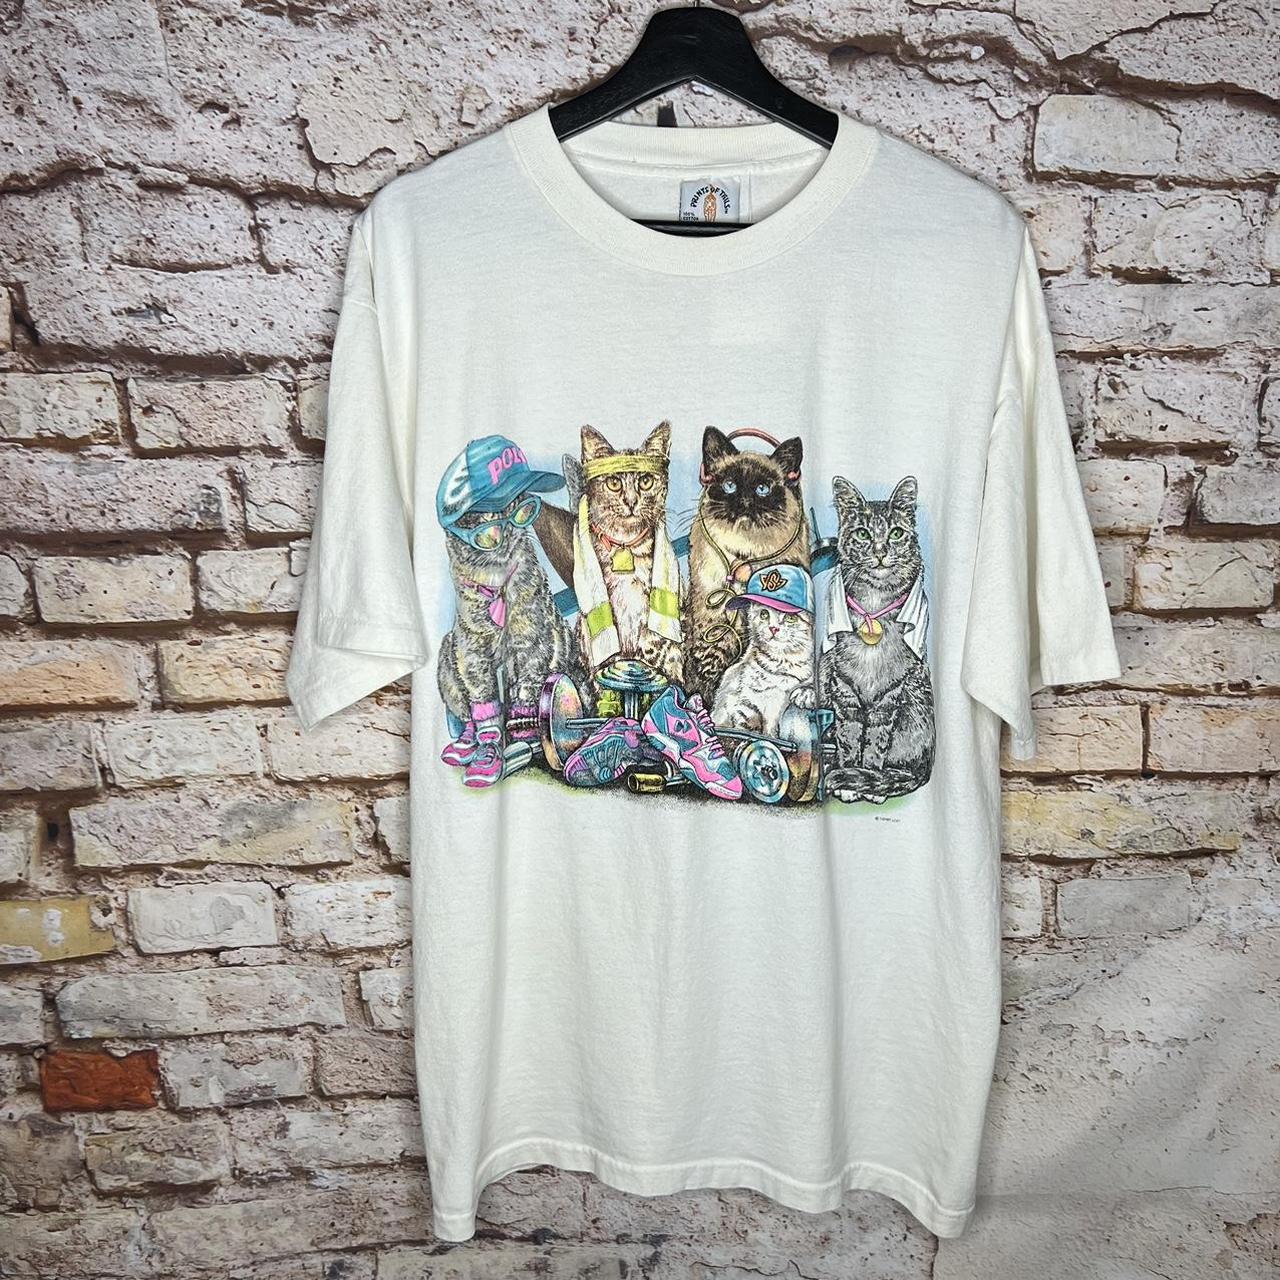 Vintage Work Out Fitness Cats T Shirt 90s Size: XL... - Depop